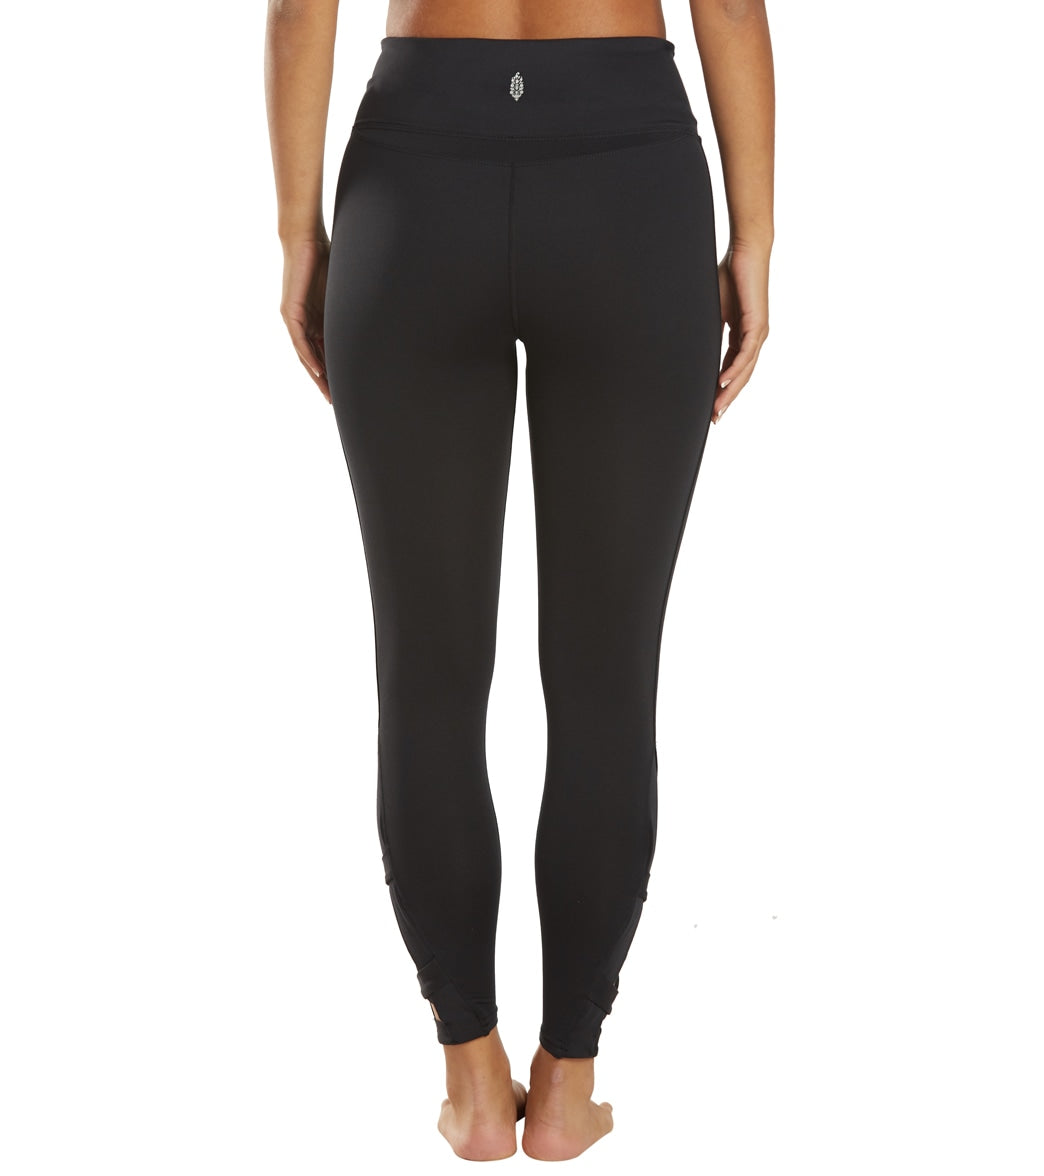 Free People Out of Your League Legging - Black